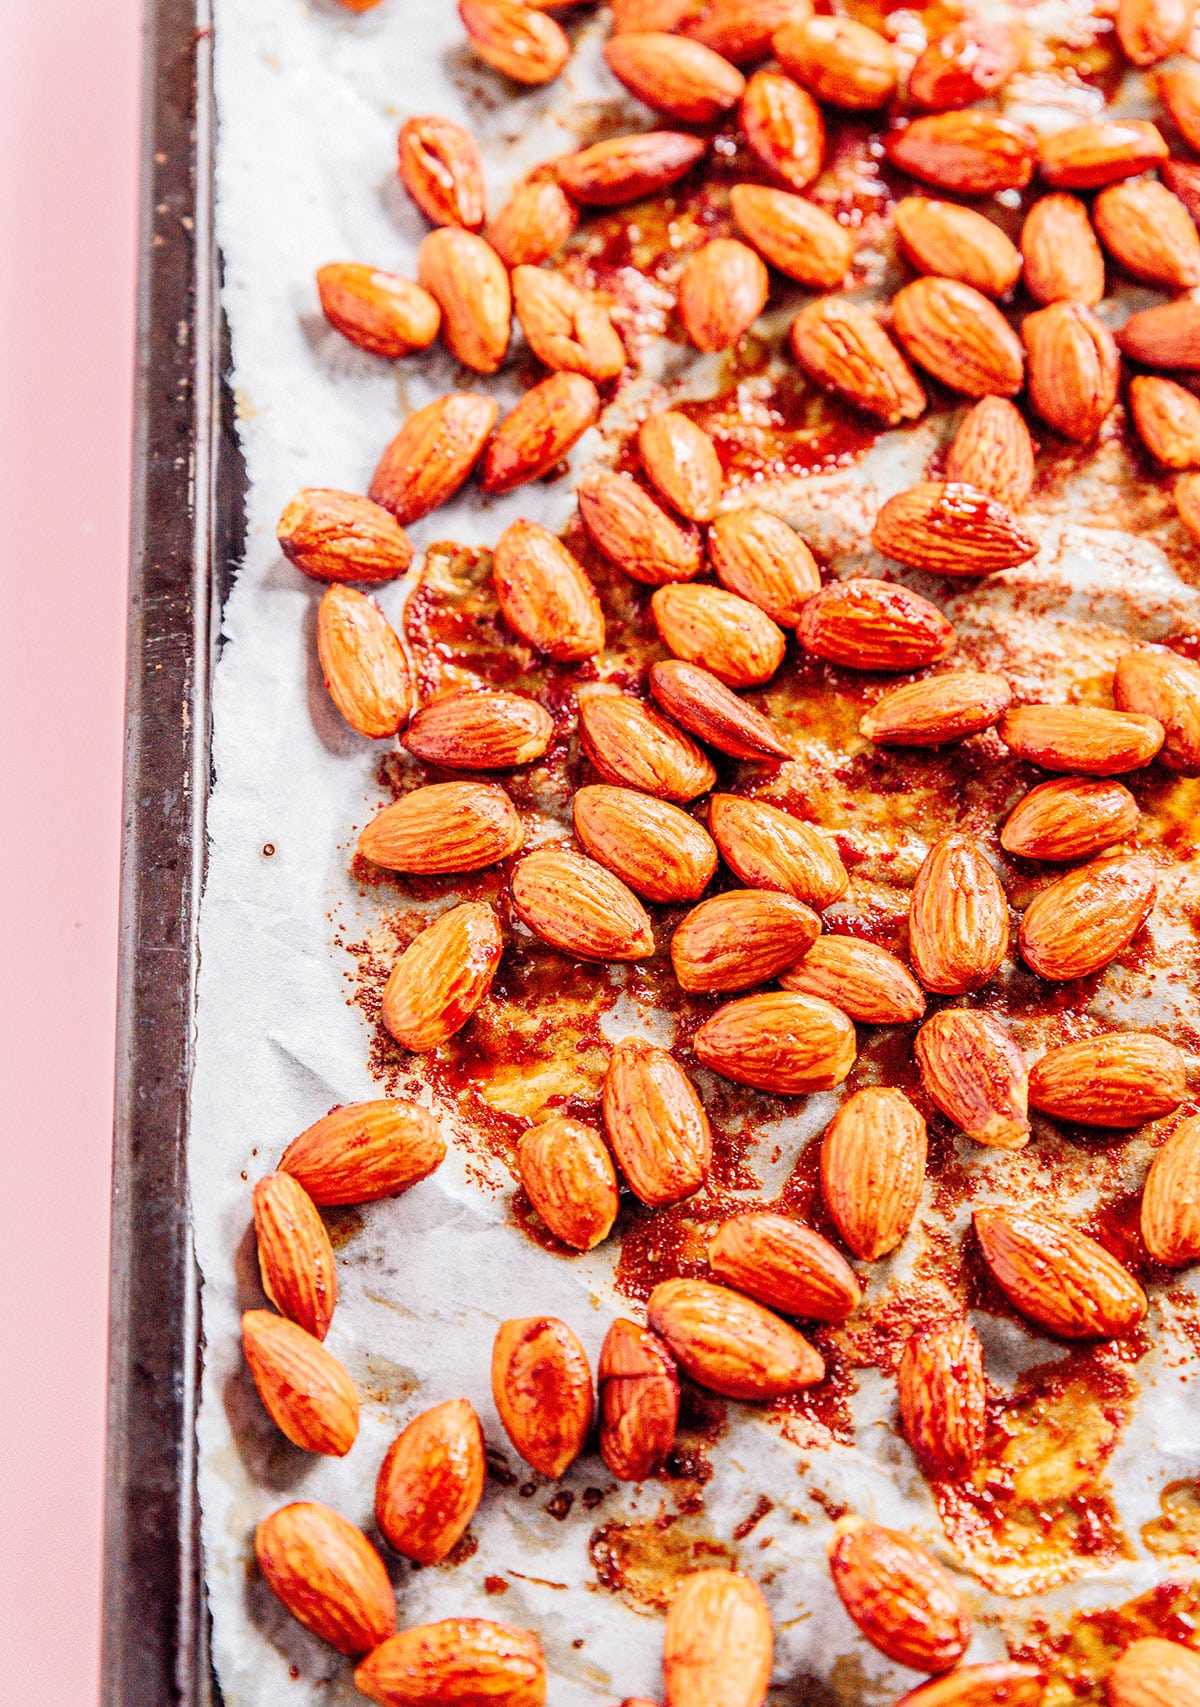 Almonds coated in smoky marinade on a parchment lined baking sheet.